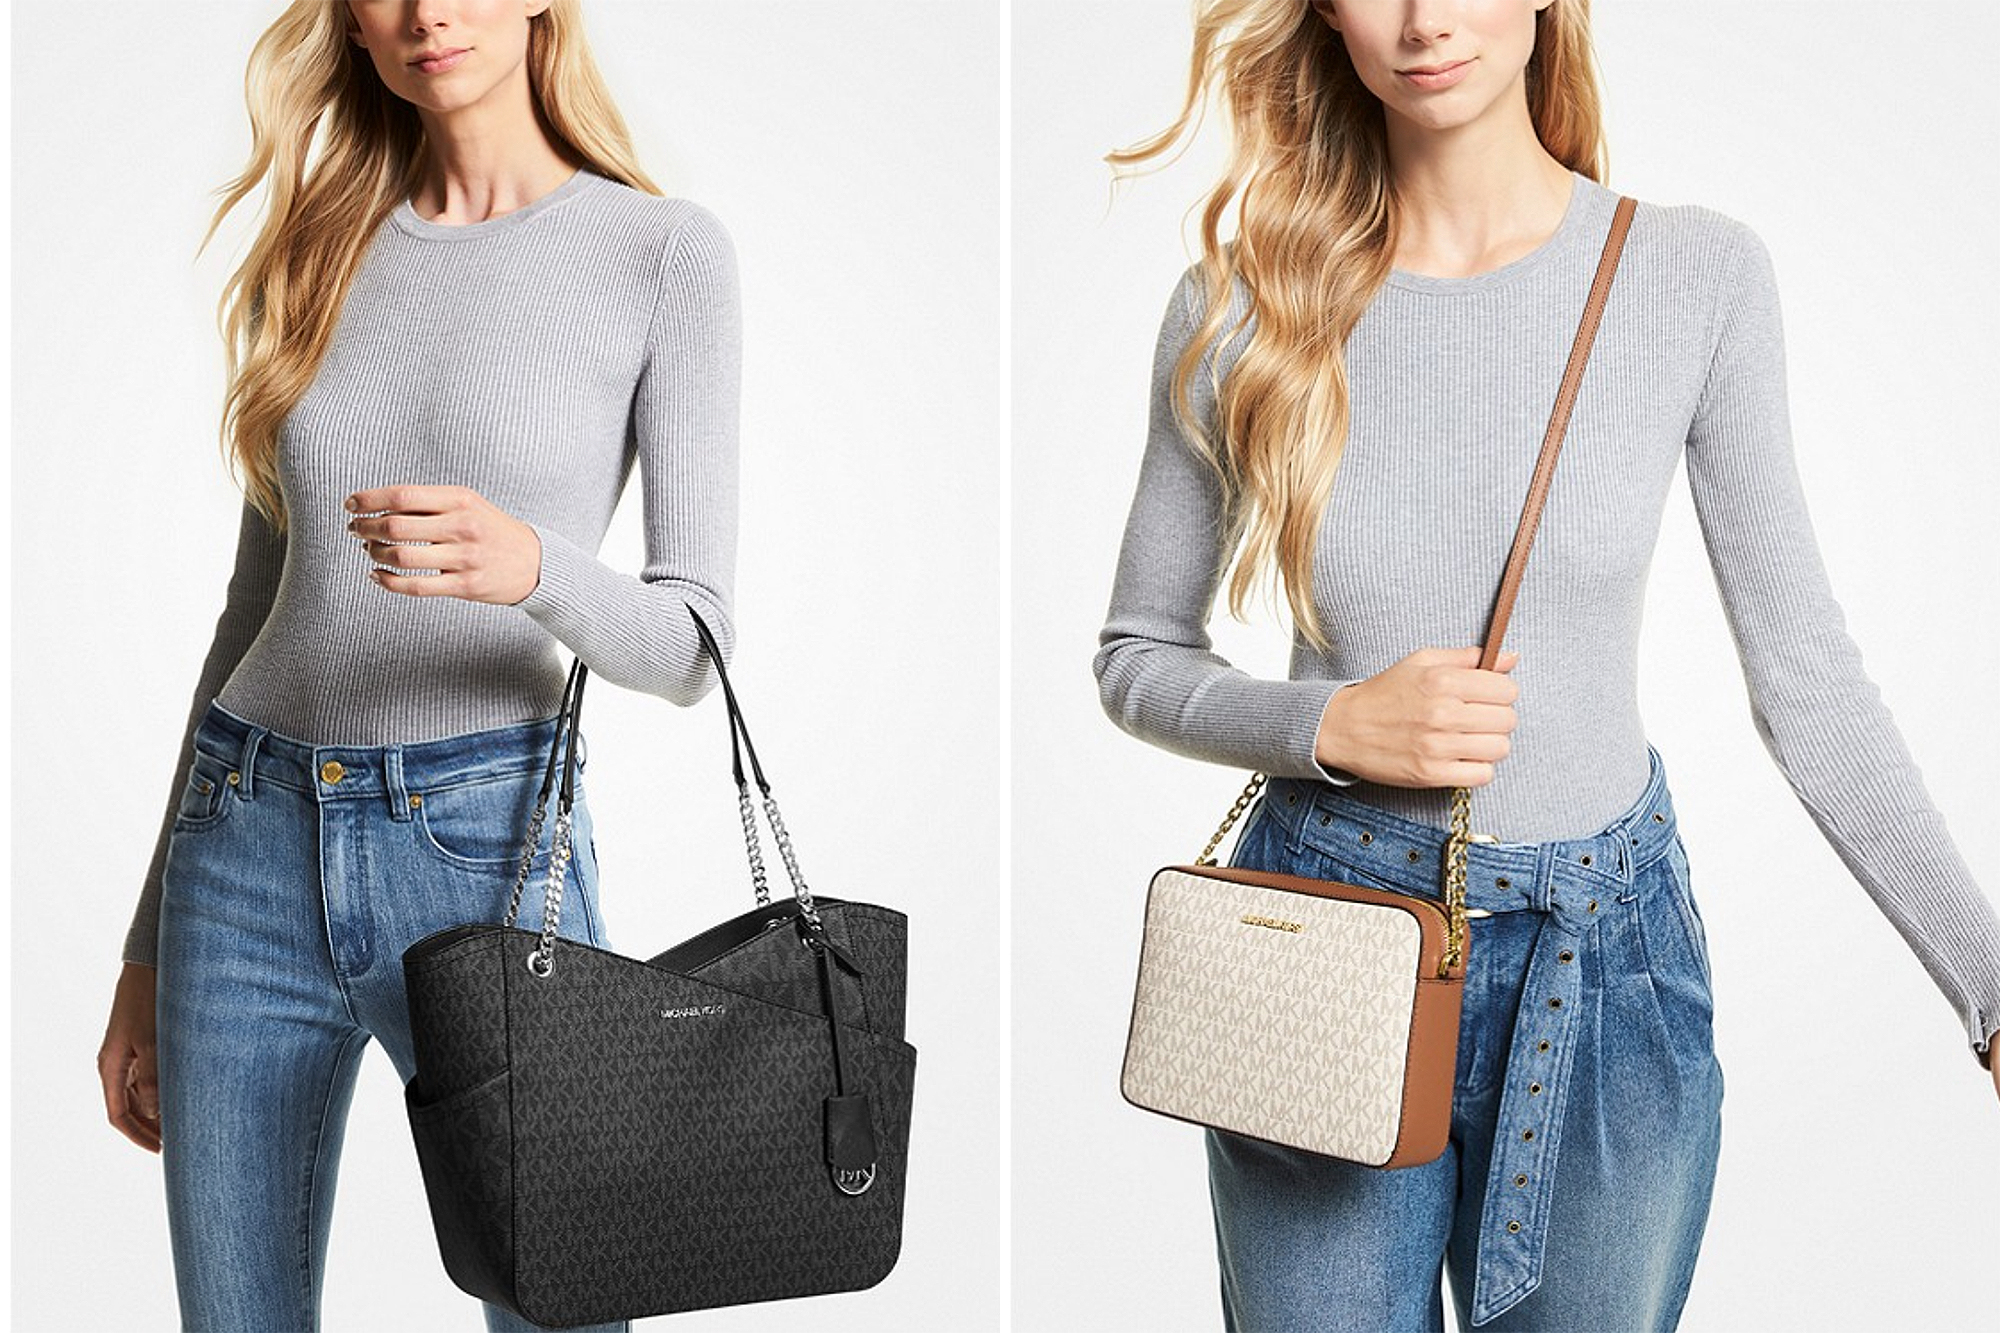 Michael Kors Bestselling Bags Are on Major Sale — Up to 78% Off